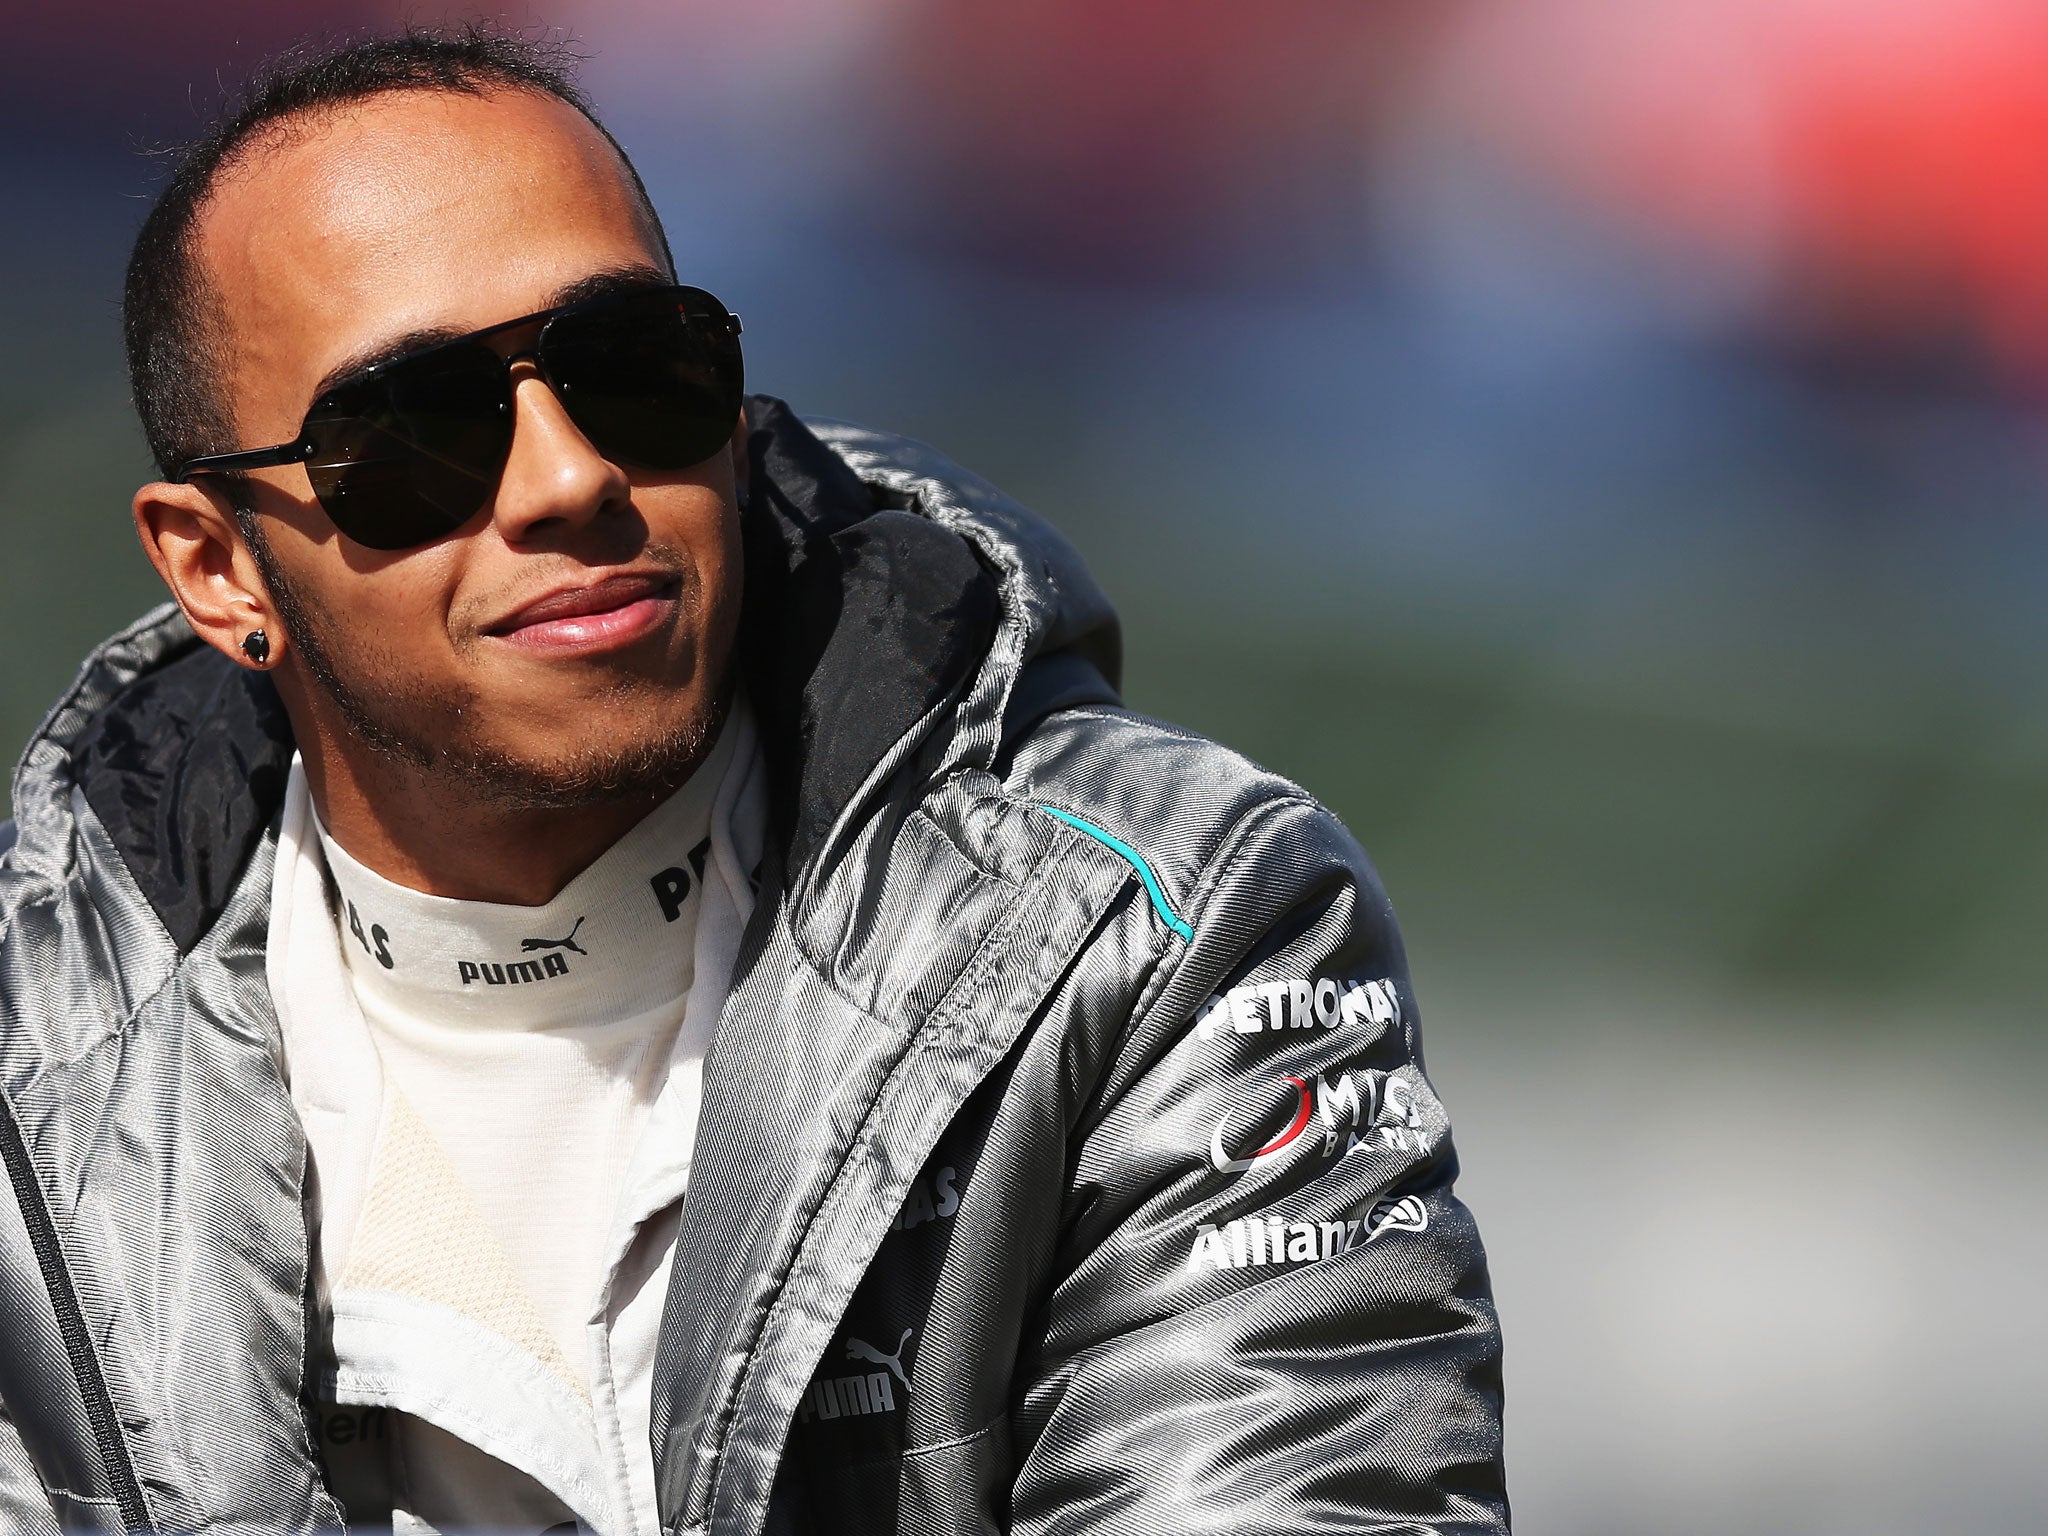 Lewis Hamilton: Former world champion said Mercedes debut had surpassed expectations